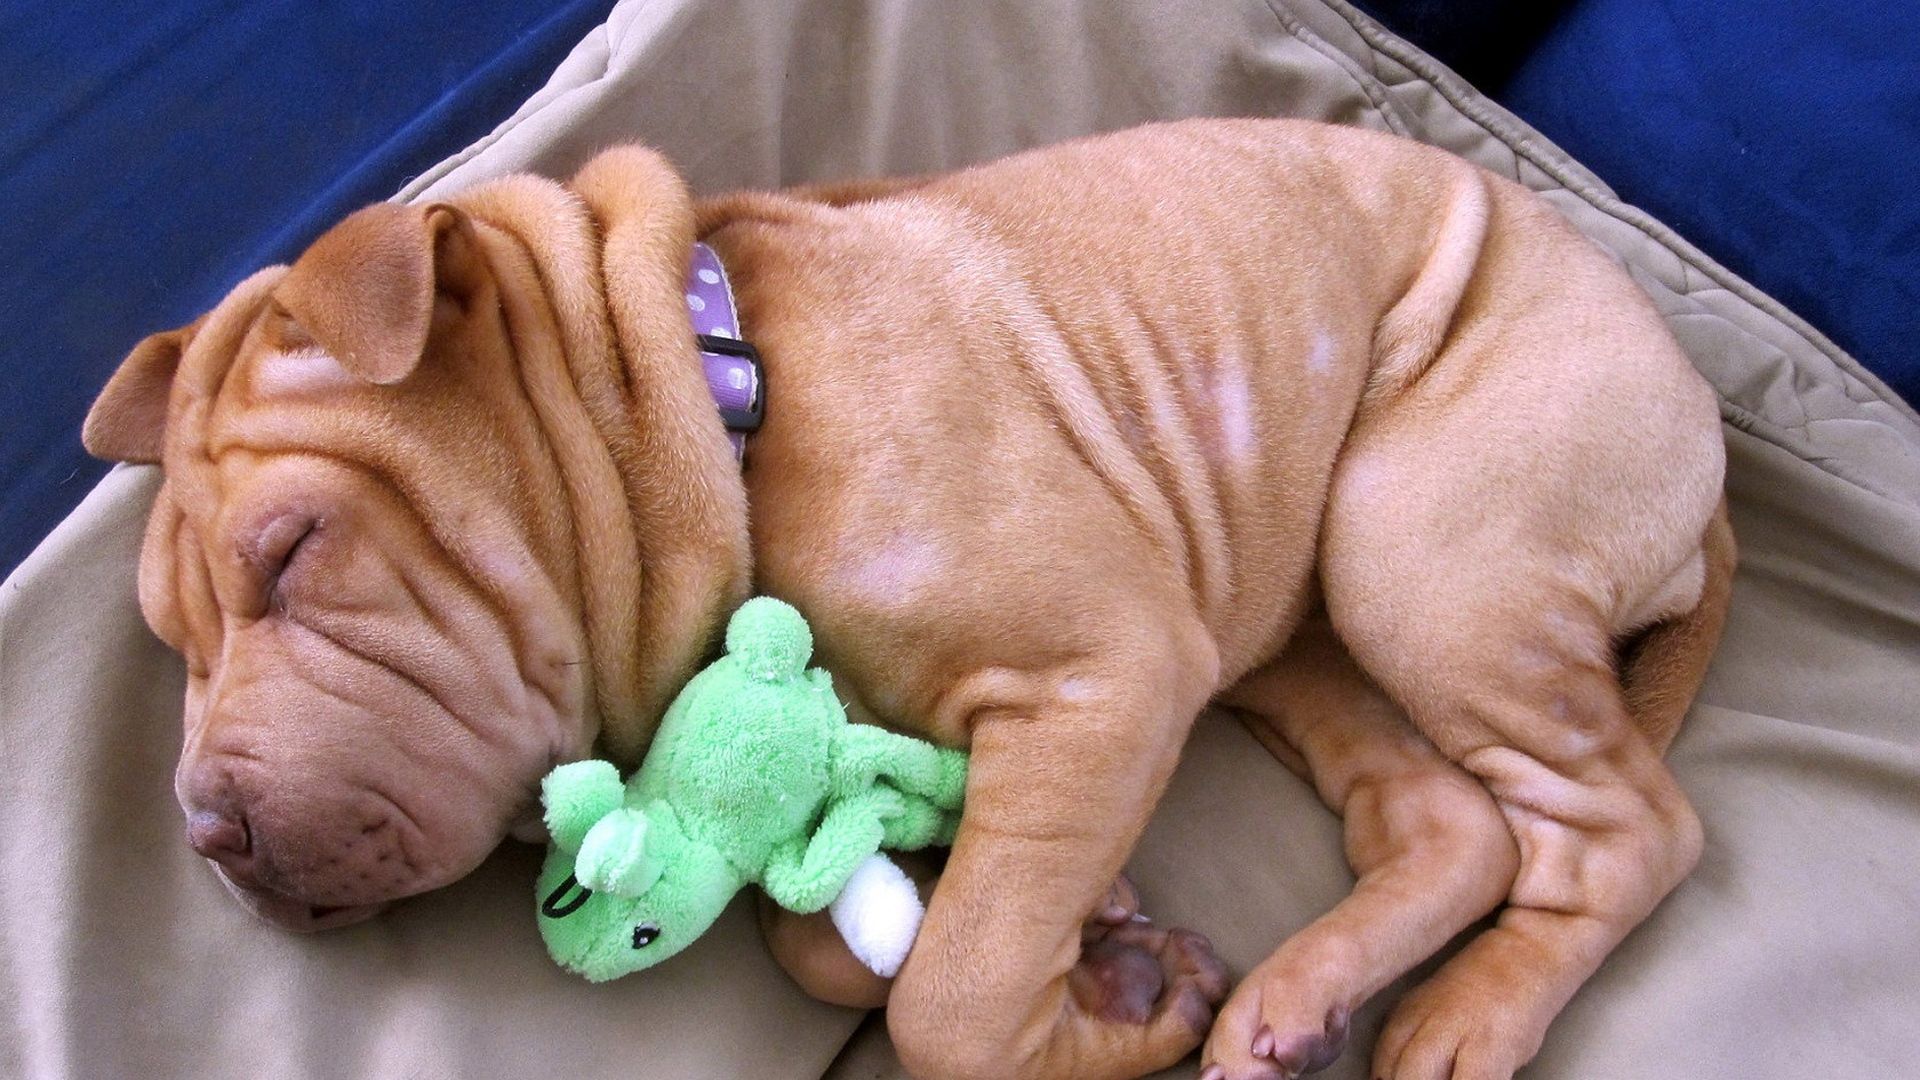 Shar-Pei puppy lying on its side sleeping soundly on the bed with its stuffed toy